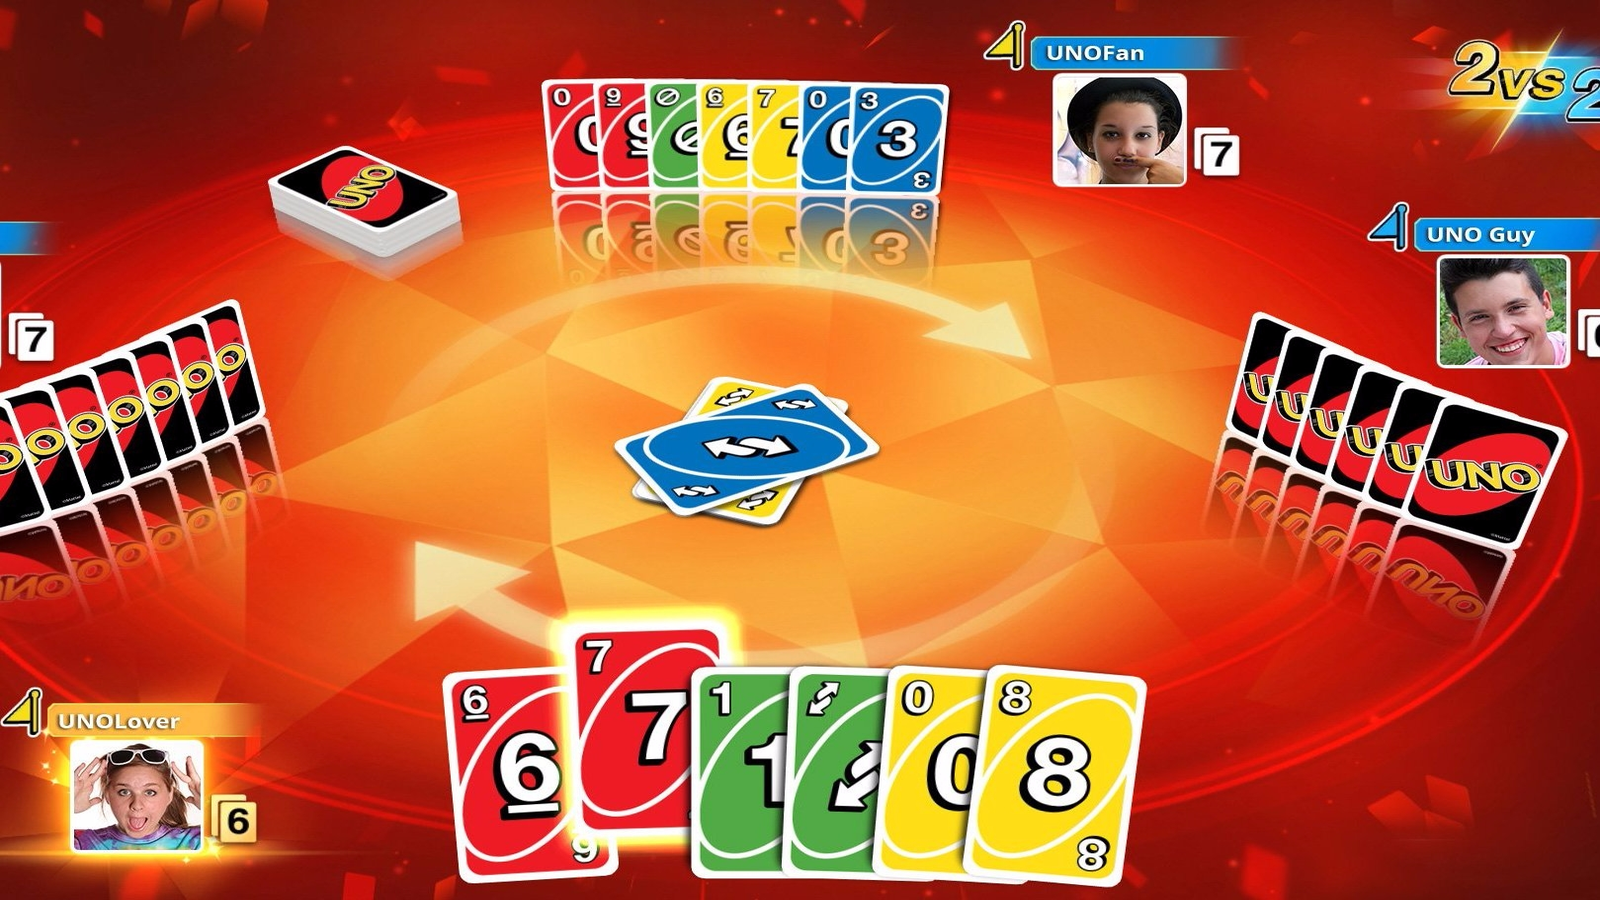 Ubisoft Releasing Uno Game For PS4, Xbox One, and PC - GameSpot